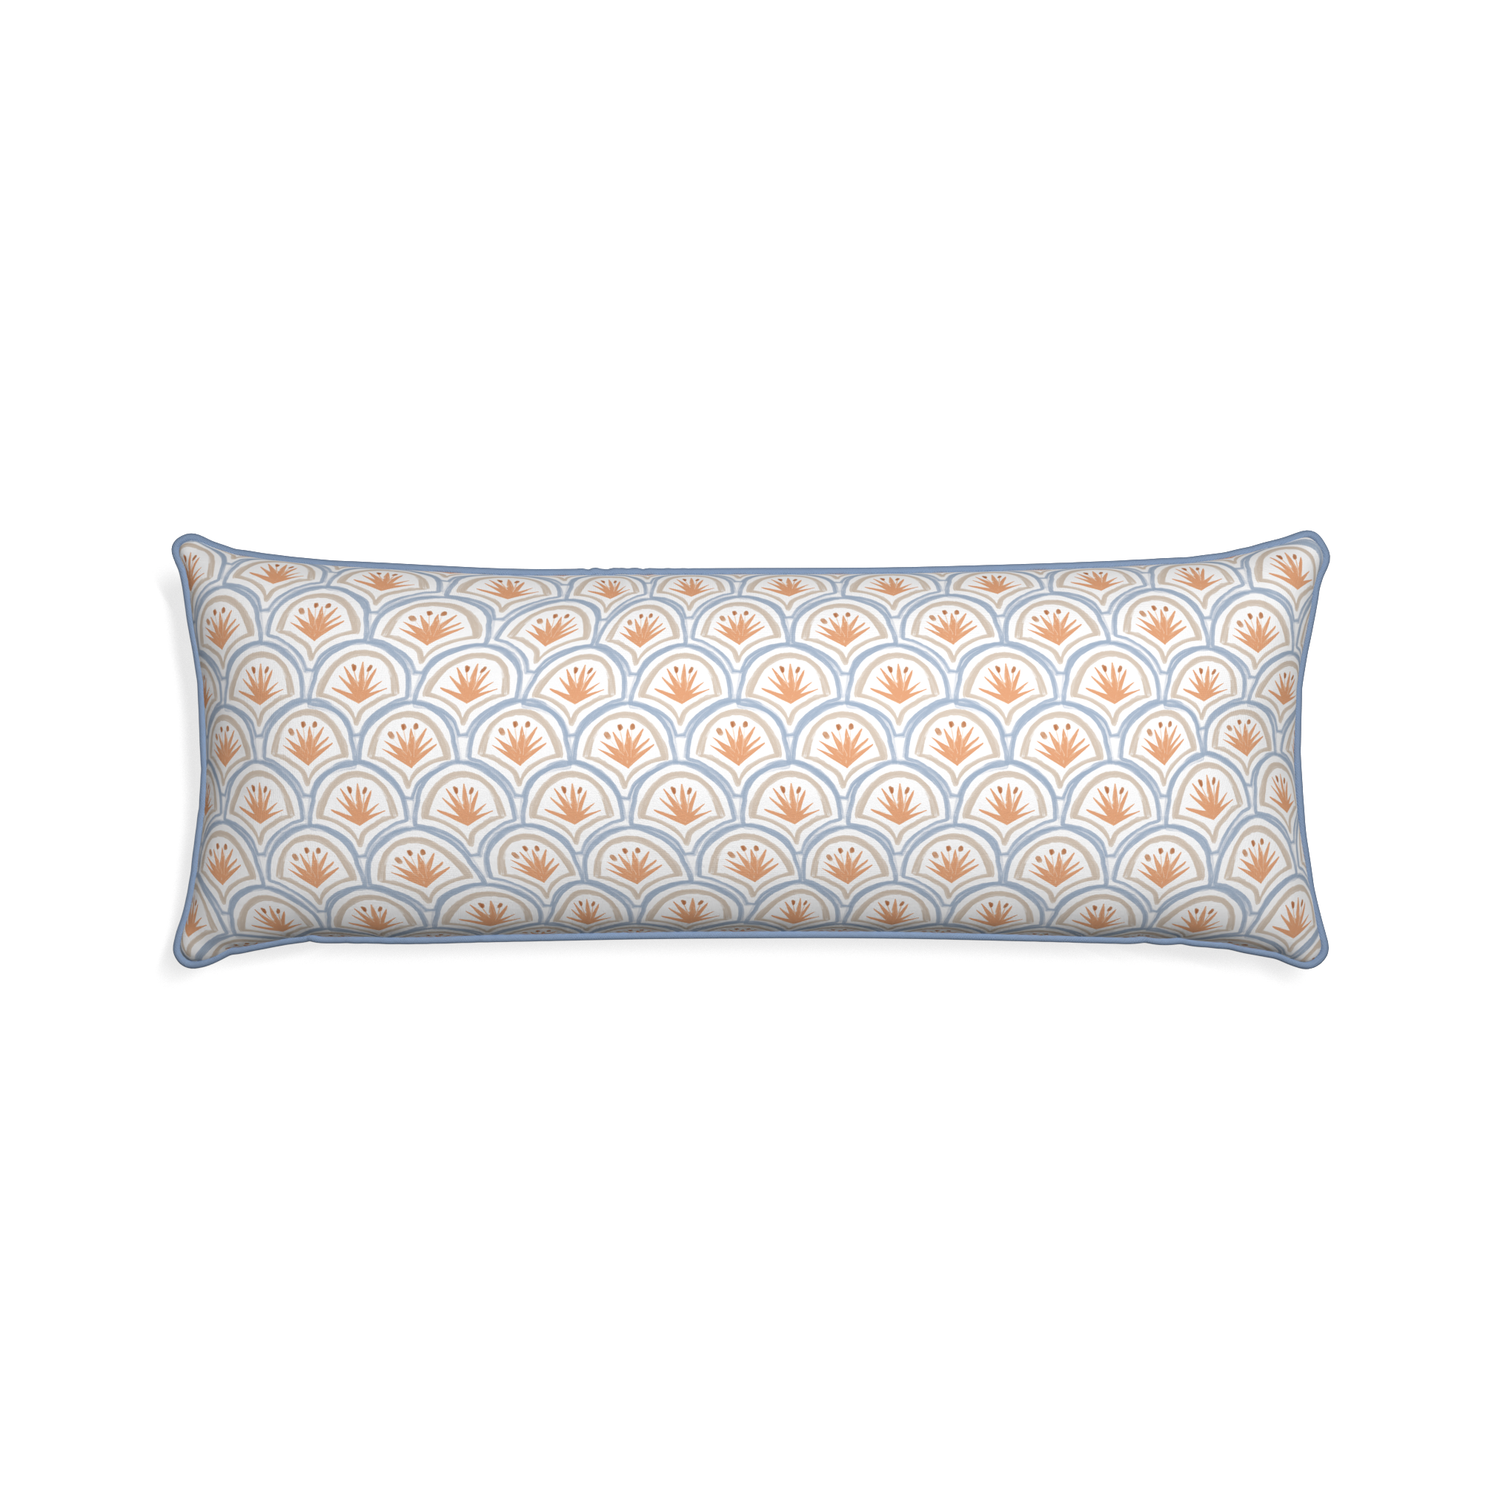 Xl-lumbar thatcher apricot custom art deco palm patternpillow with sky piping on white background